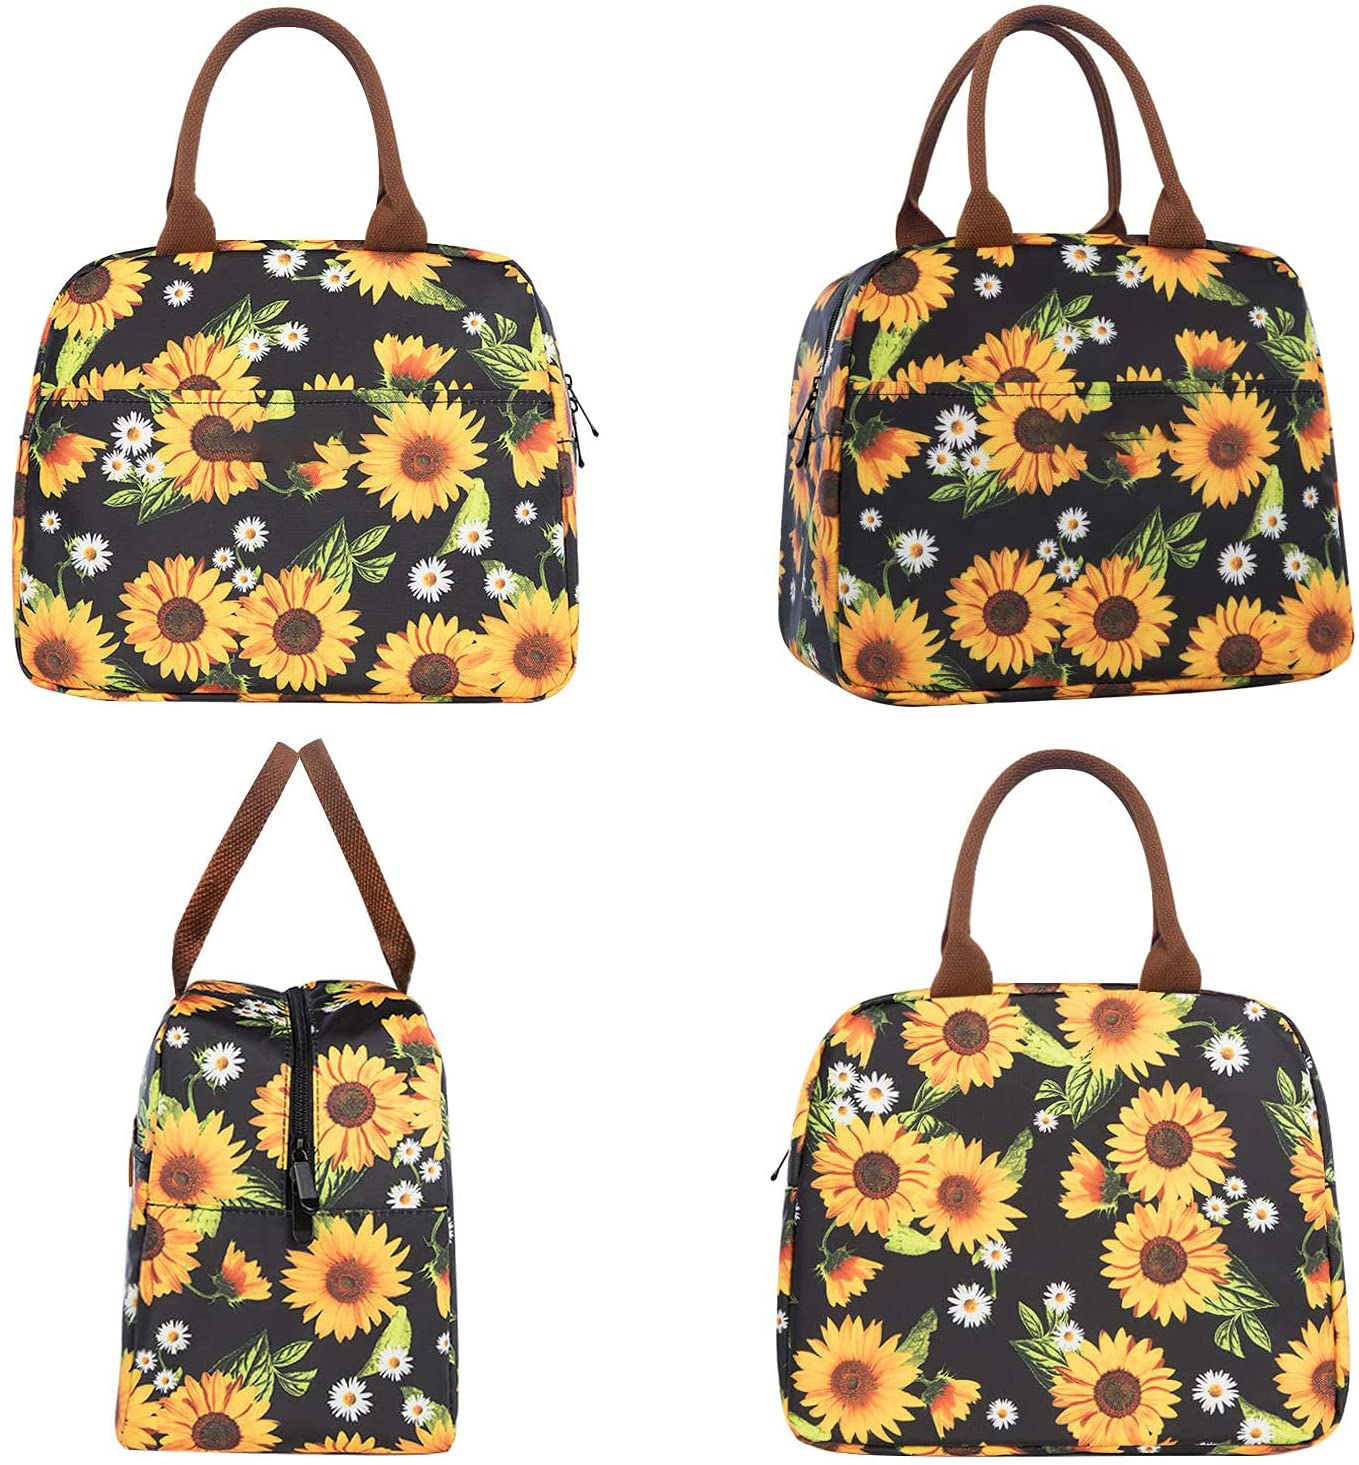 Lunch Bags for Women Insulated Lunch Box Cooler Tote Bag with Front Pocket Reusable Lunch Bag for Men Adults Girls Work Hiking Picnic - Sunflower